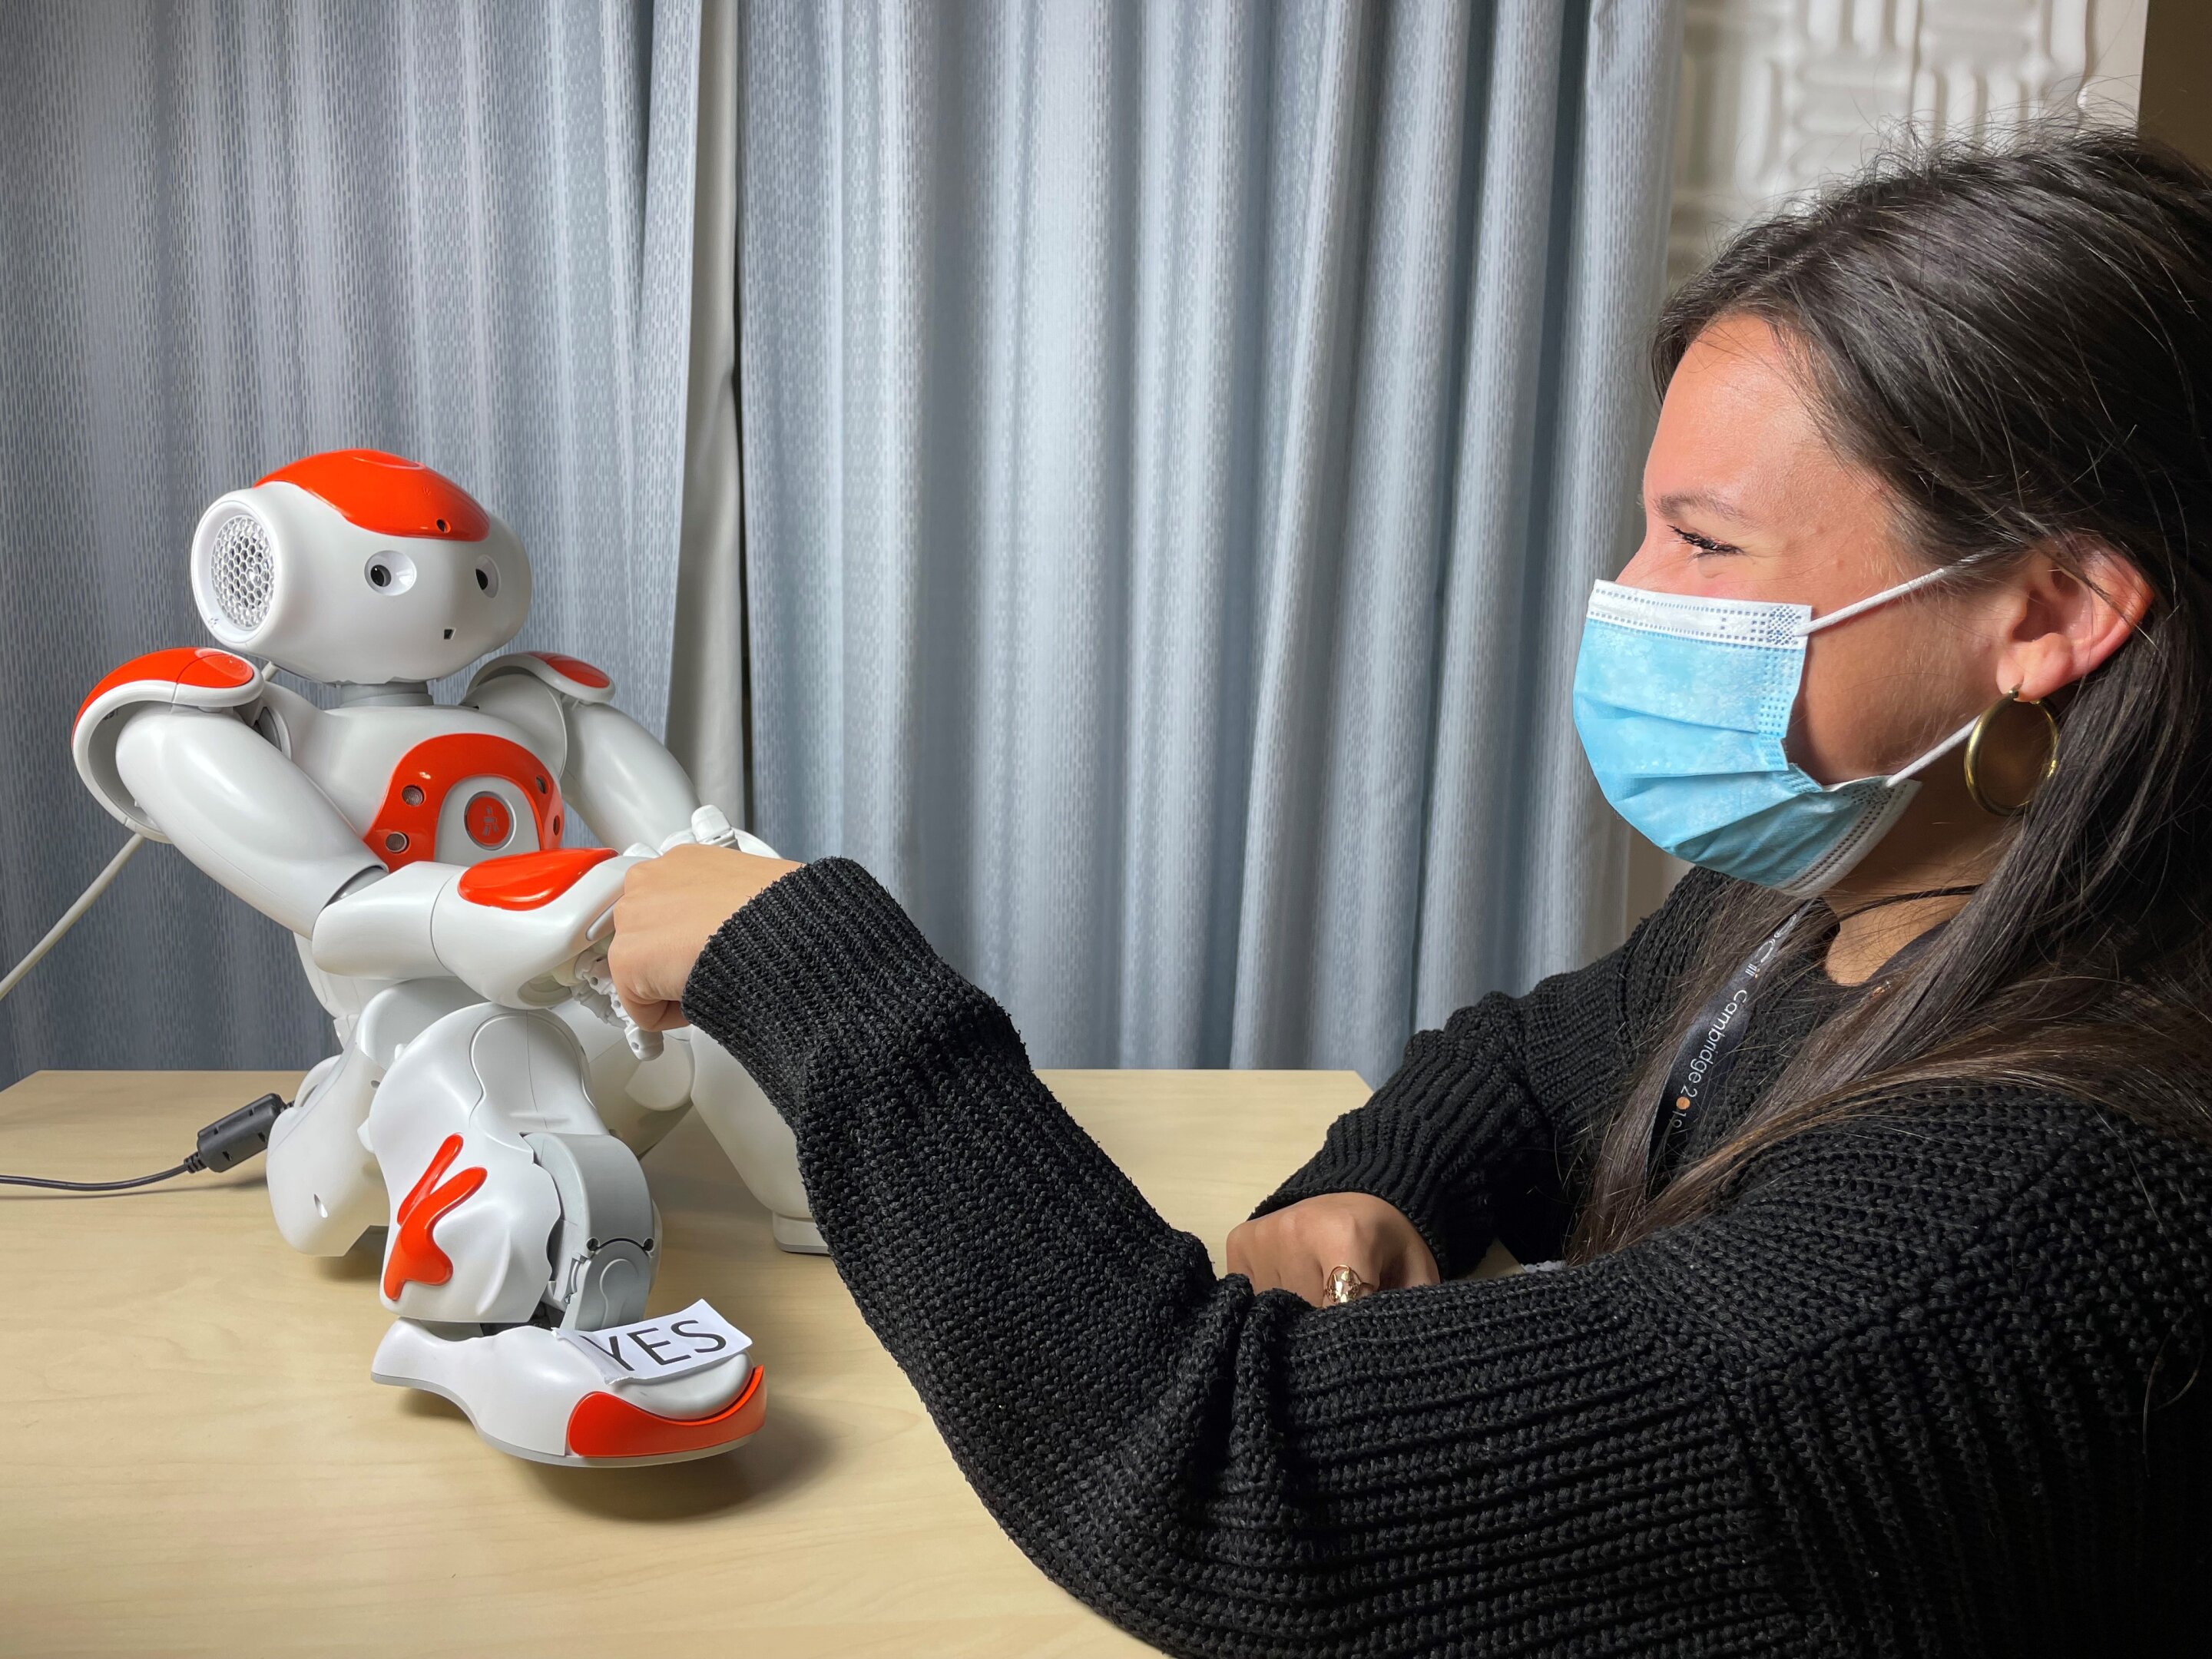 #Robots can be used to assess children’s mental well-being, study suggests